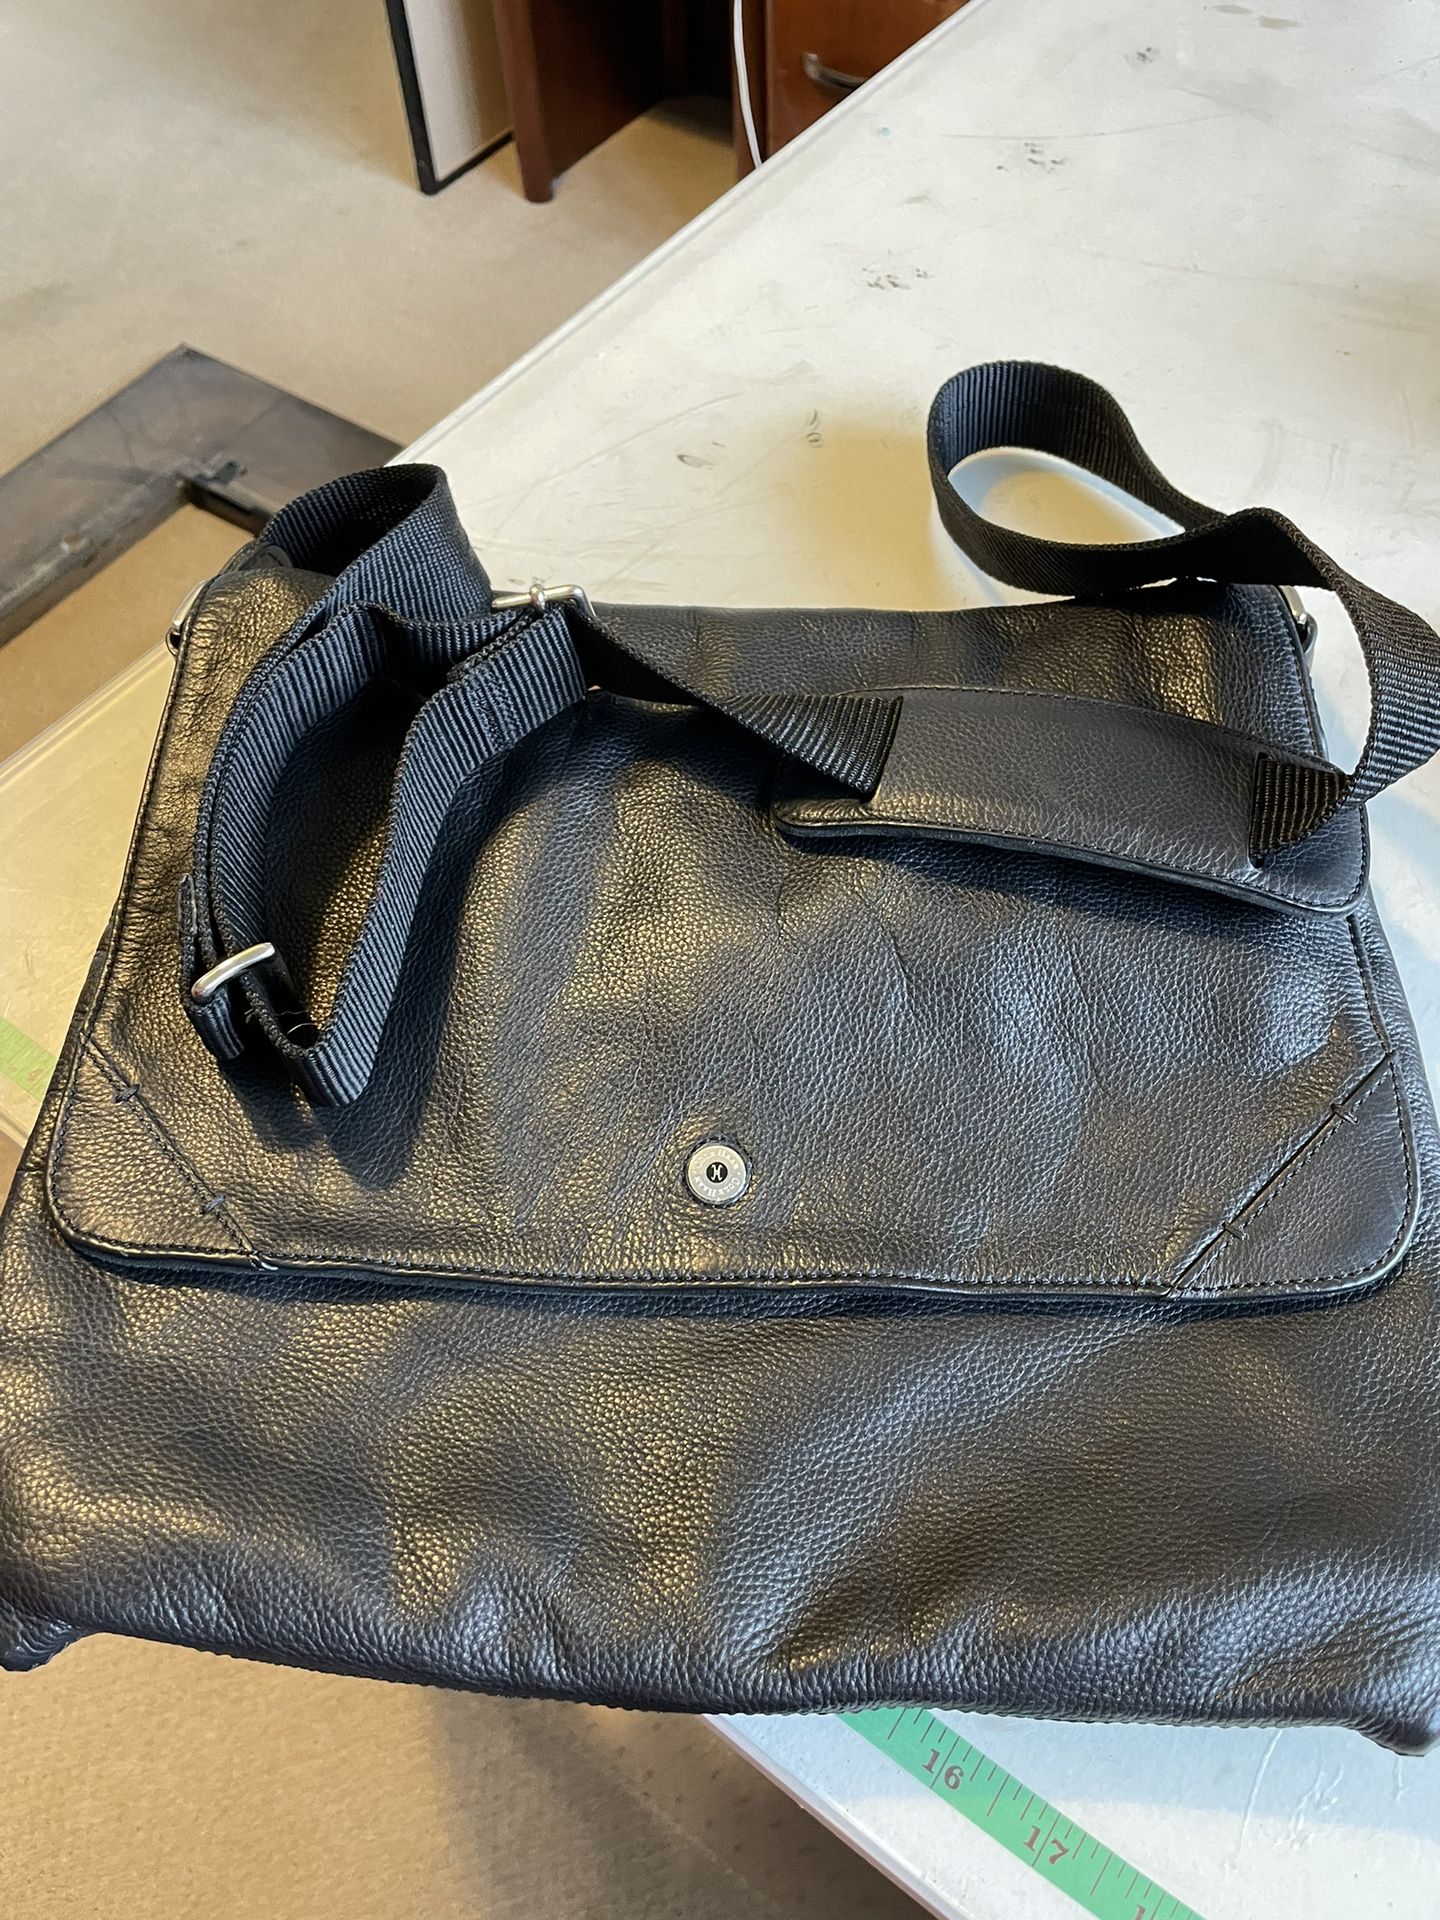 Cole Haan Leather And Suede Messenger Bag